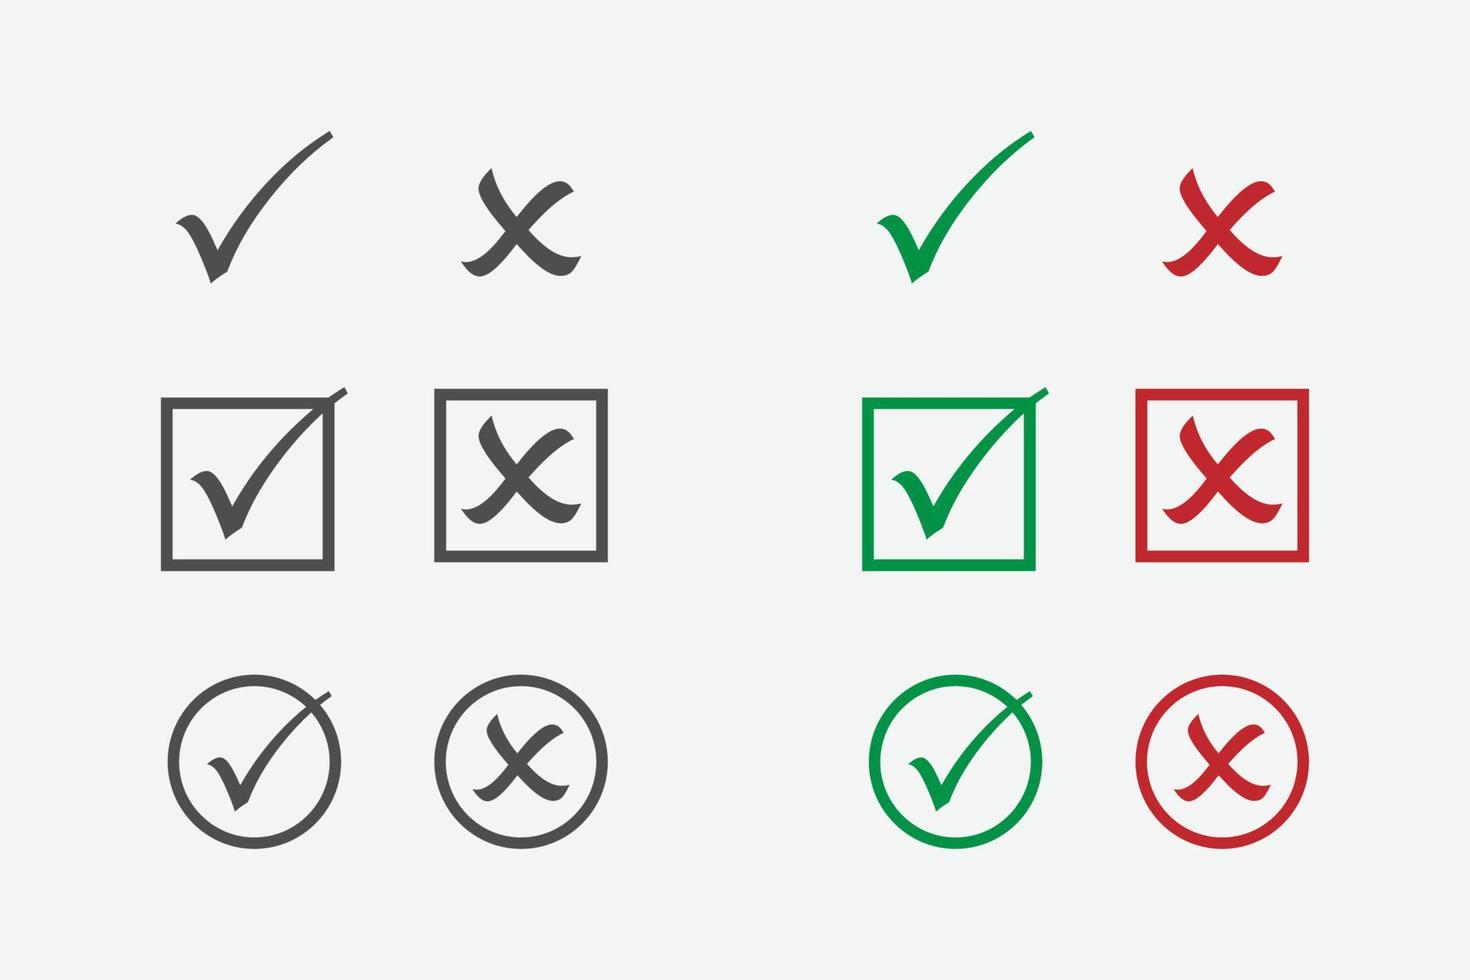 Check and Wrong icons. Set of check marks. Green tick, red cross vector